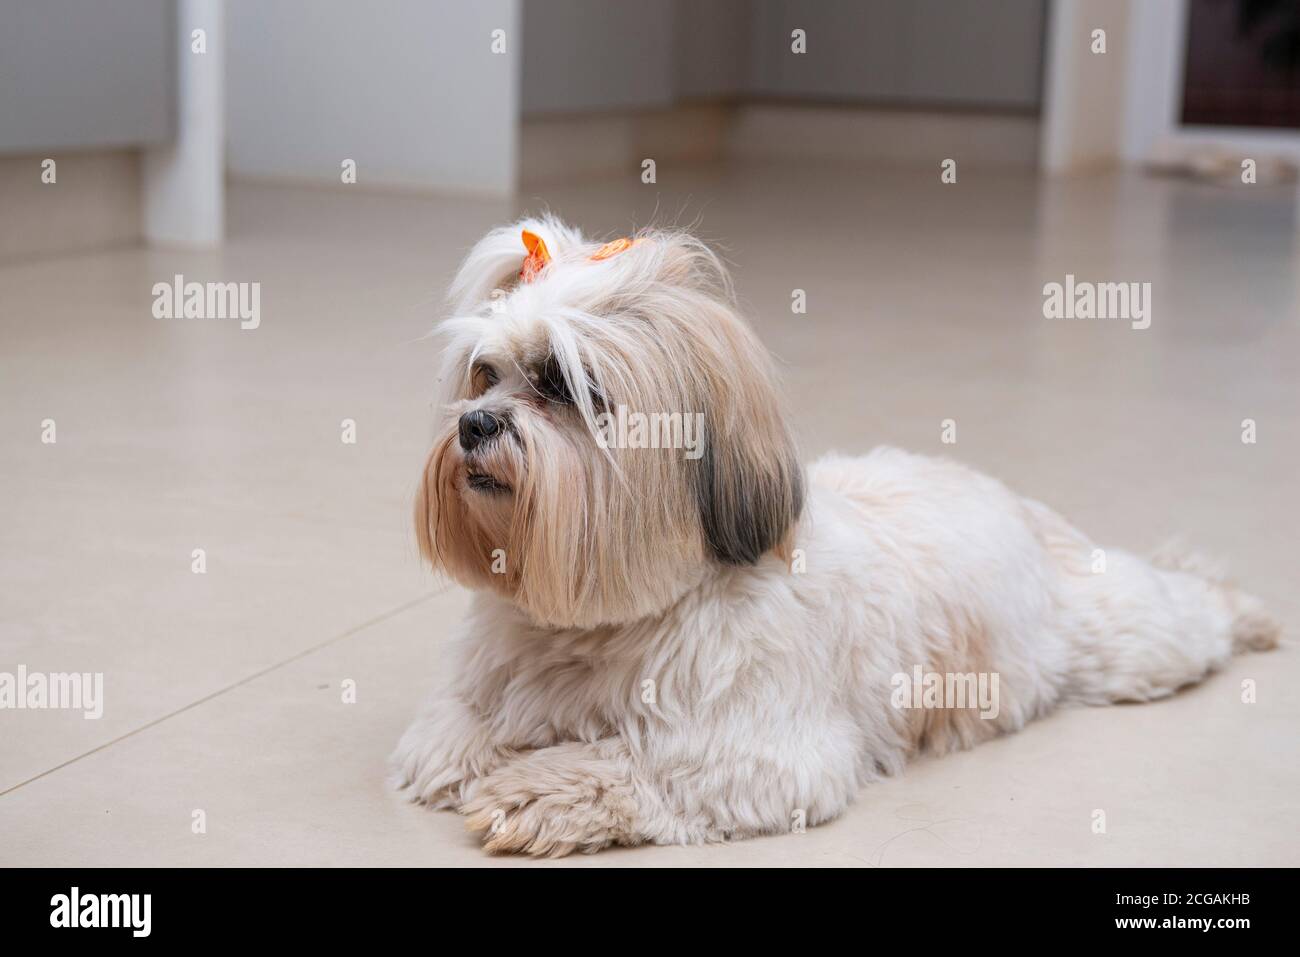 Lhasa apso lying on the floor relaxing with orange bow. small domestic animal. man's best friend. Pet concept. Stock Photo